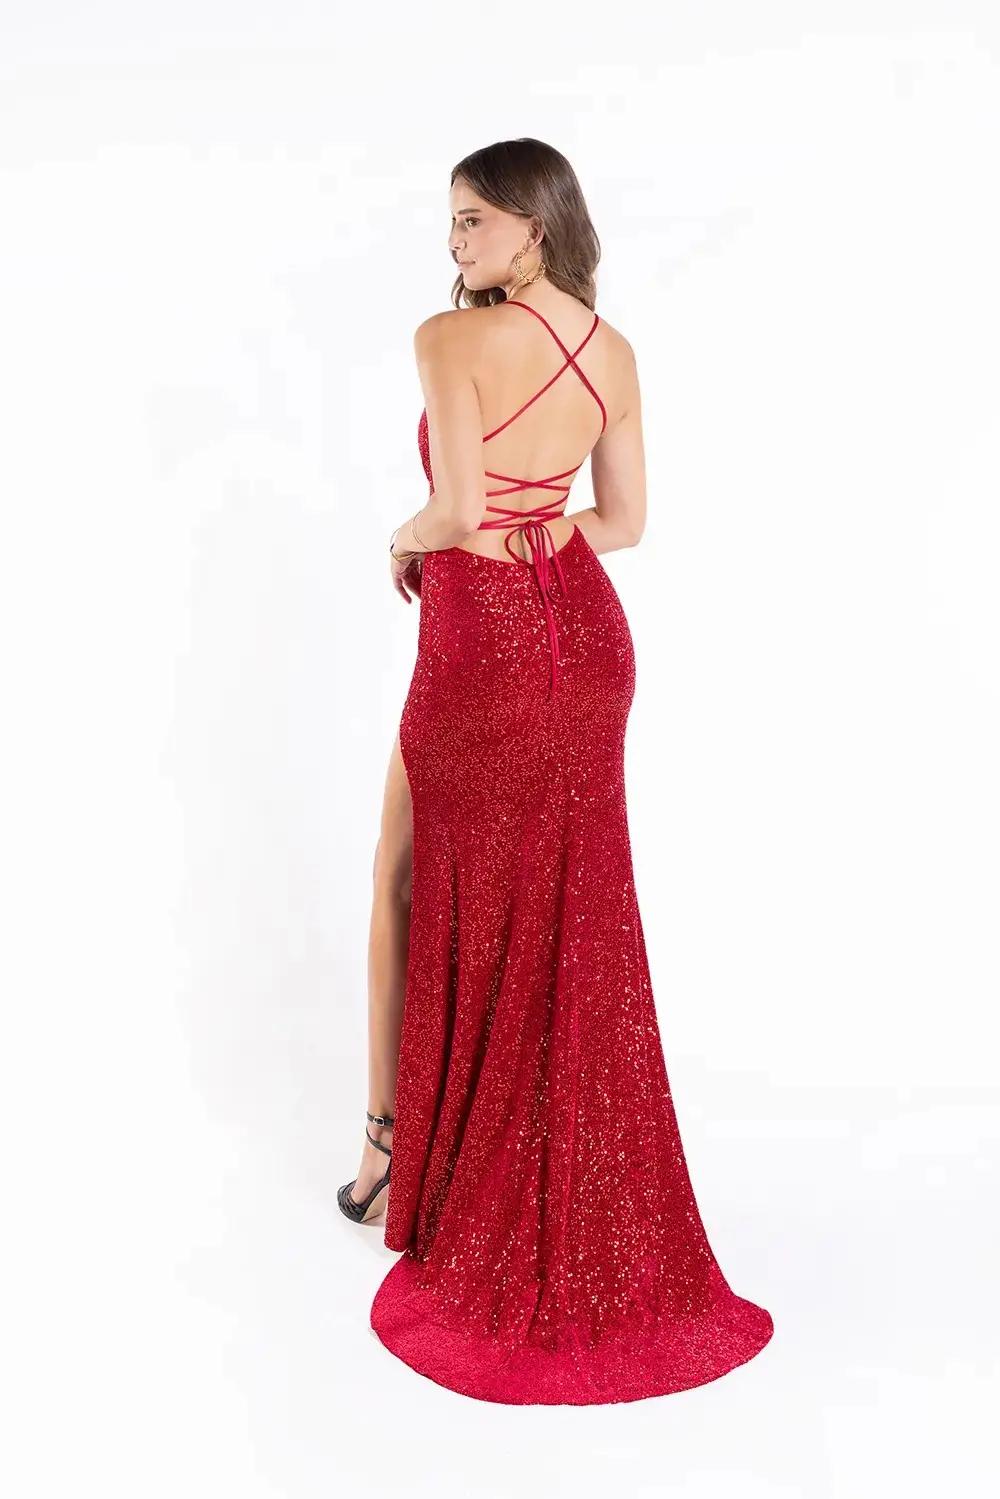 Model wearing a Lucci Lu Spring long red gown